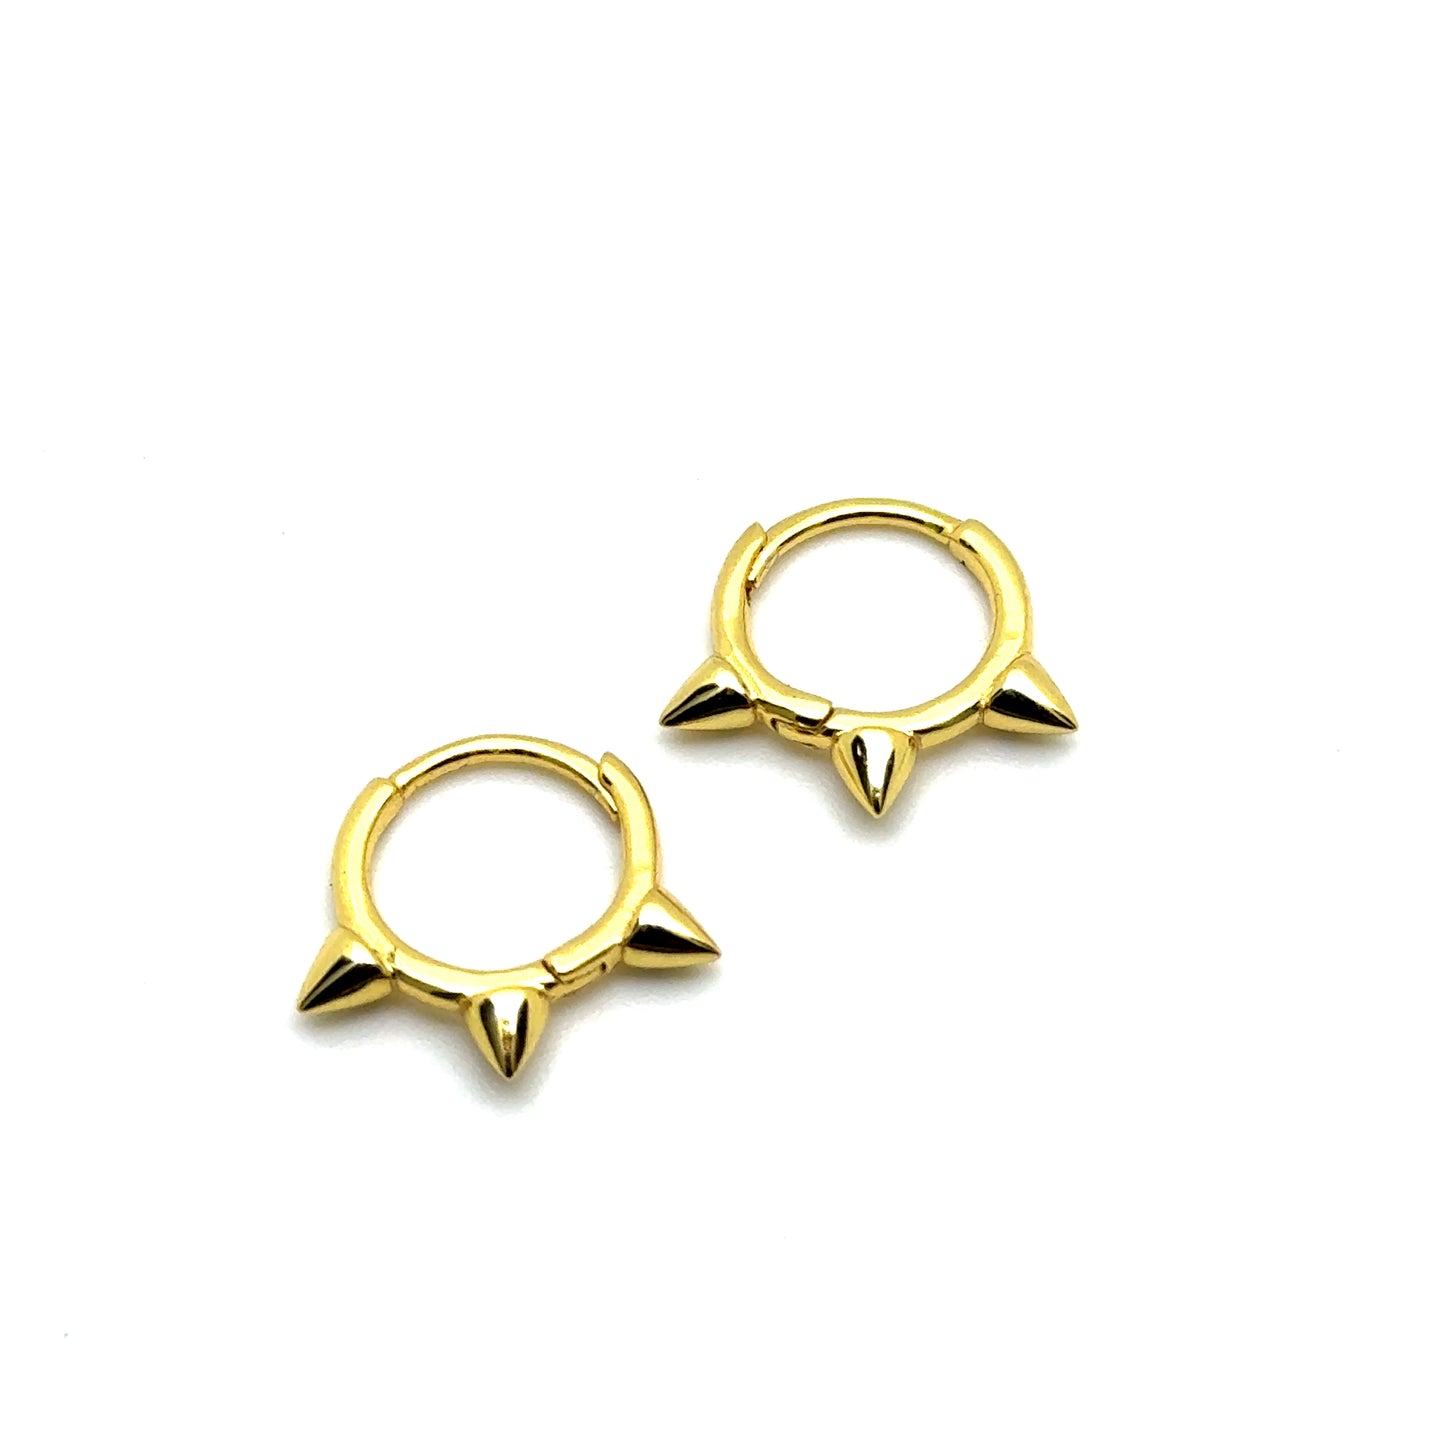 Small Spiked Huggies in Sterling Silver or 18k Gold Over Silver